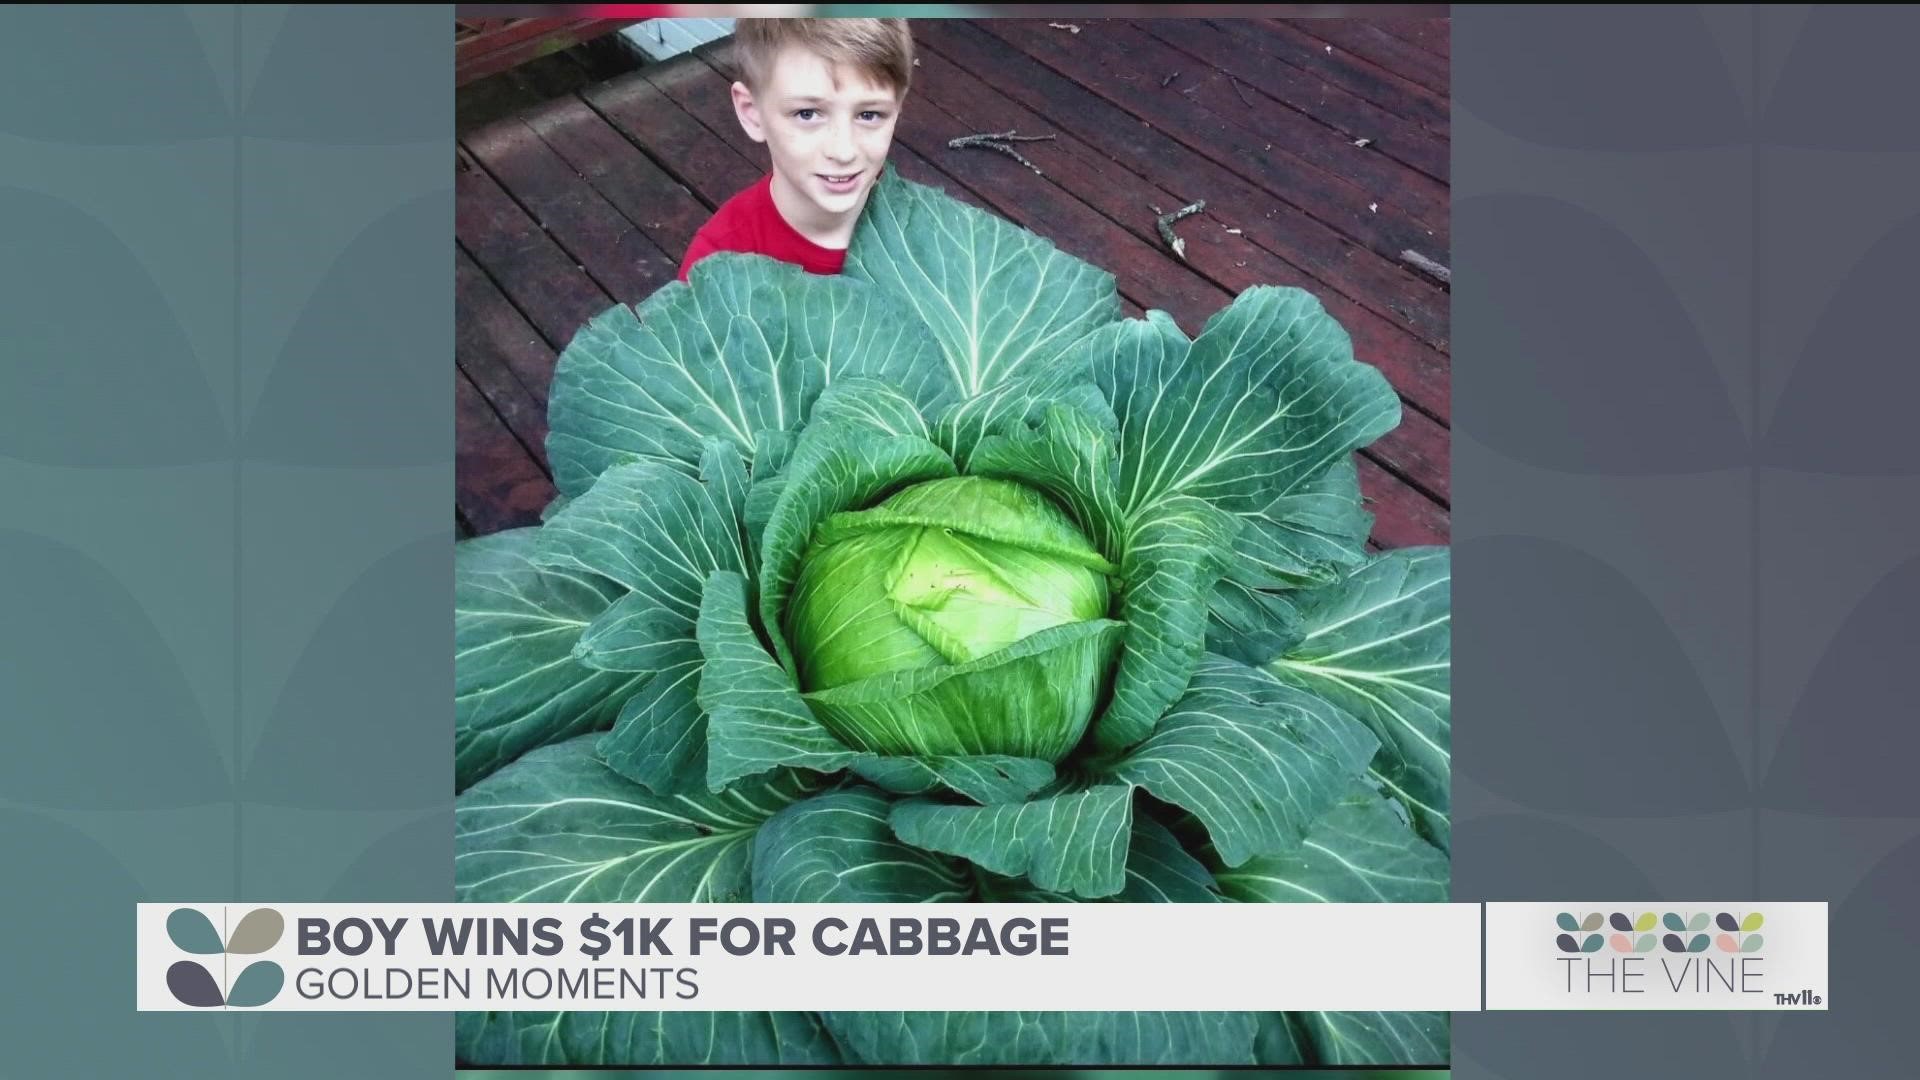 Marshall Furqueron in North Little Rock was awarded a $1,000 scholarship for a cabbage he grew.